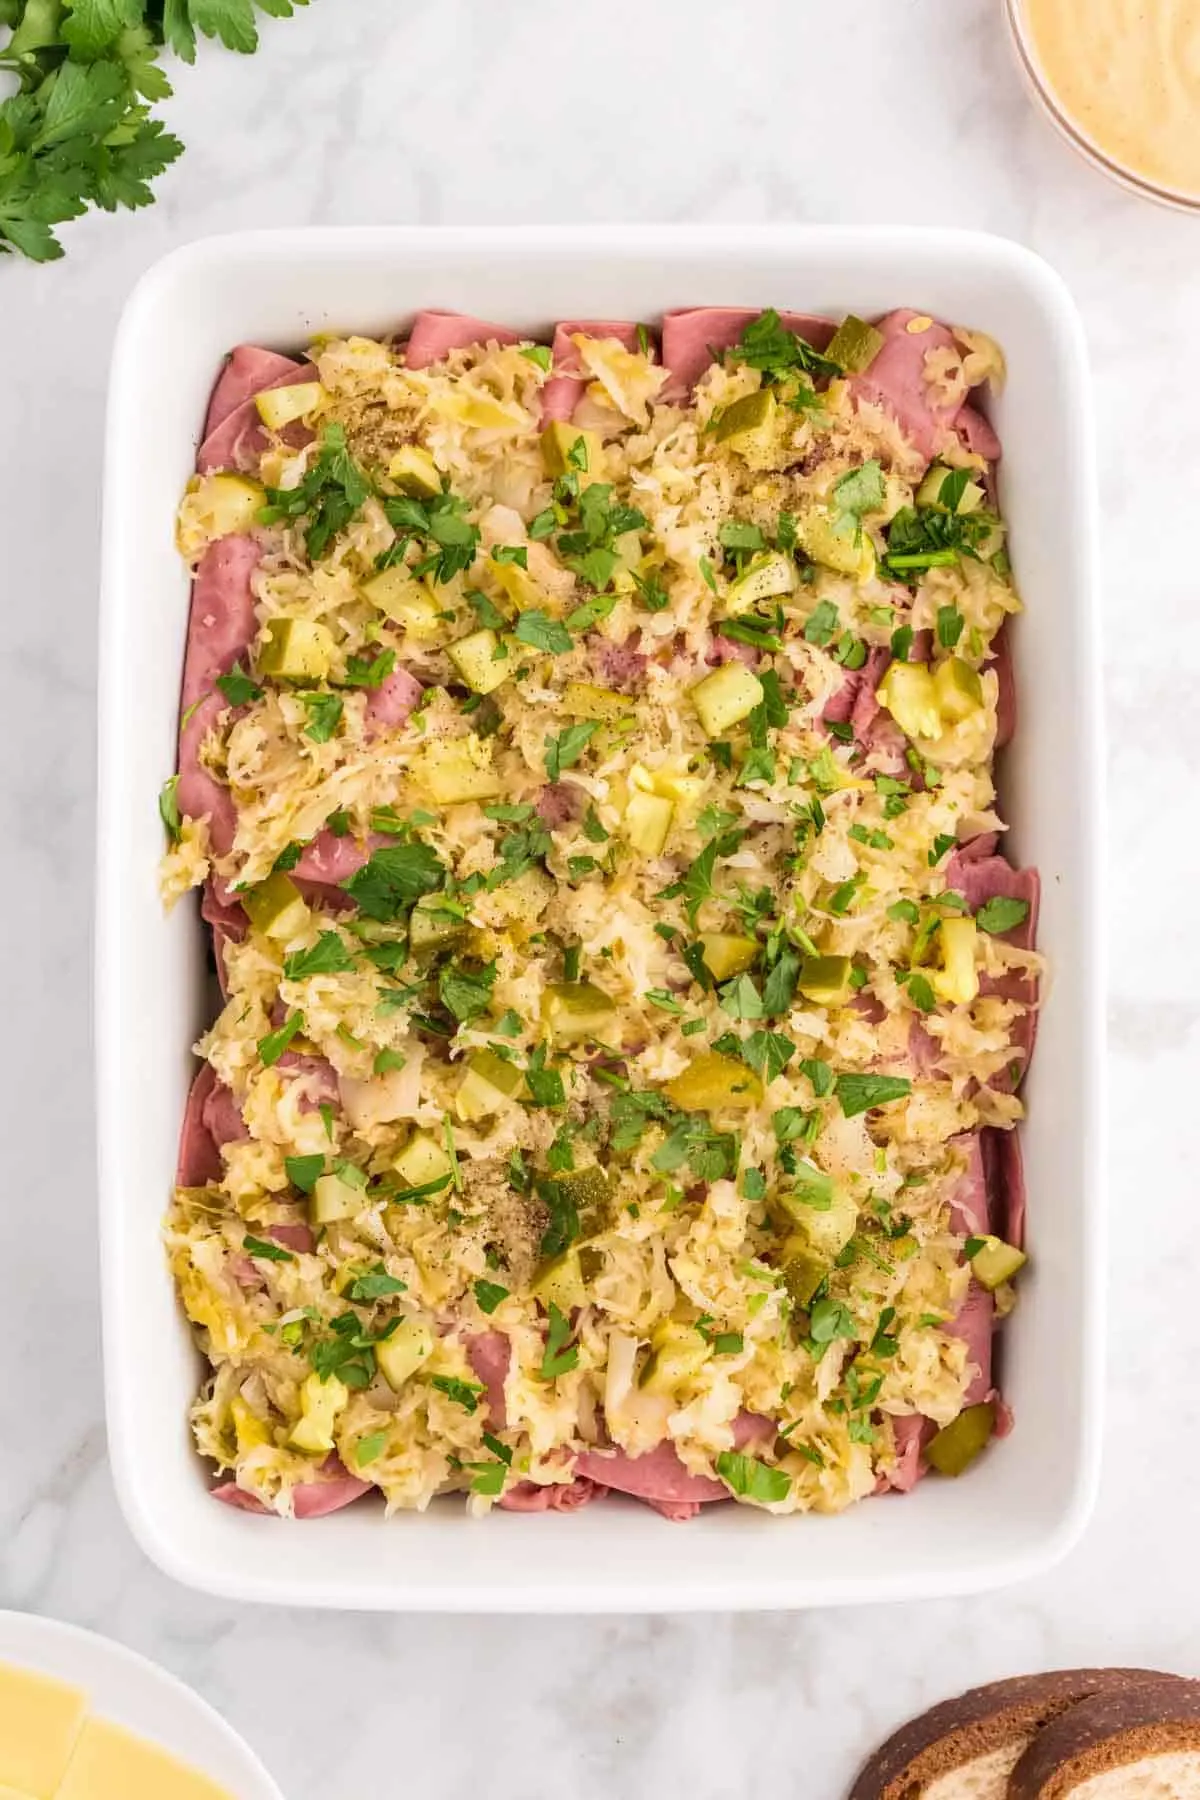 chopped parsley, chopped pickles, sauerkraut and corned beef in a casserole dish